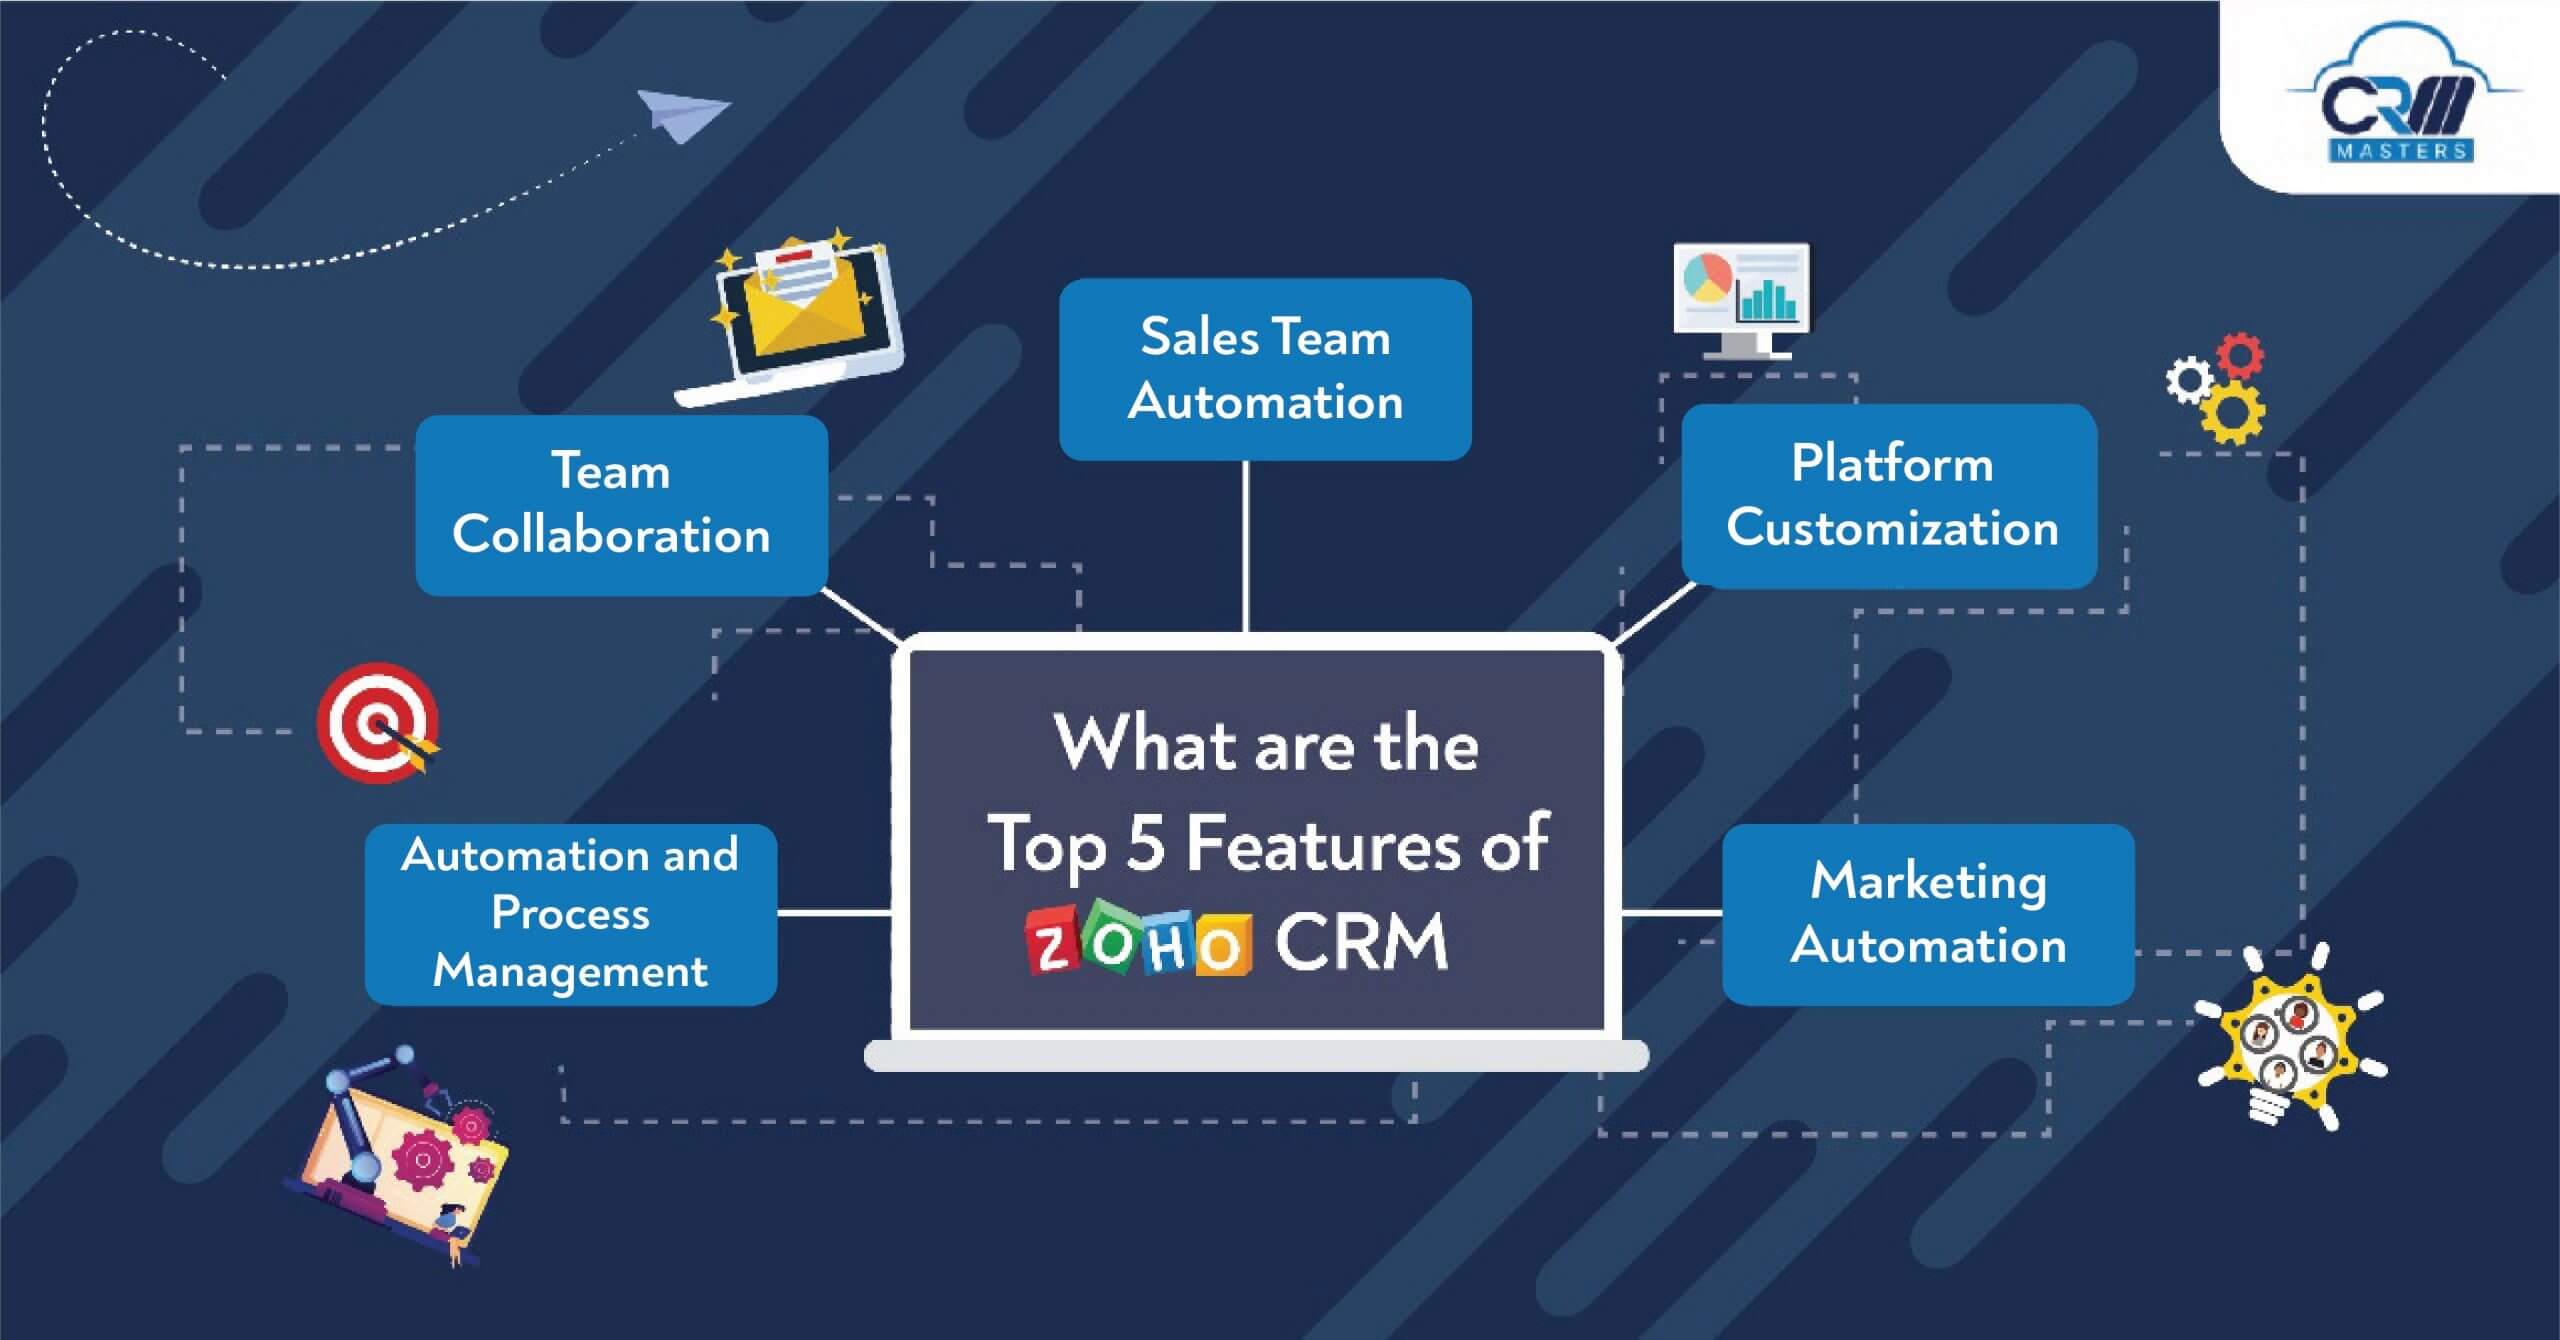 Features of Zoho CRM